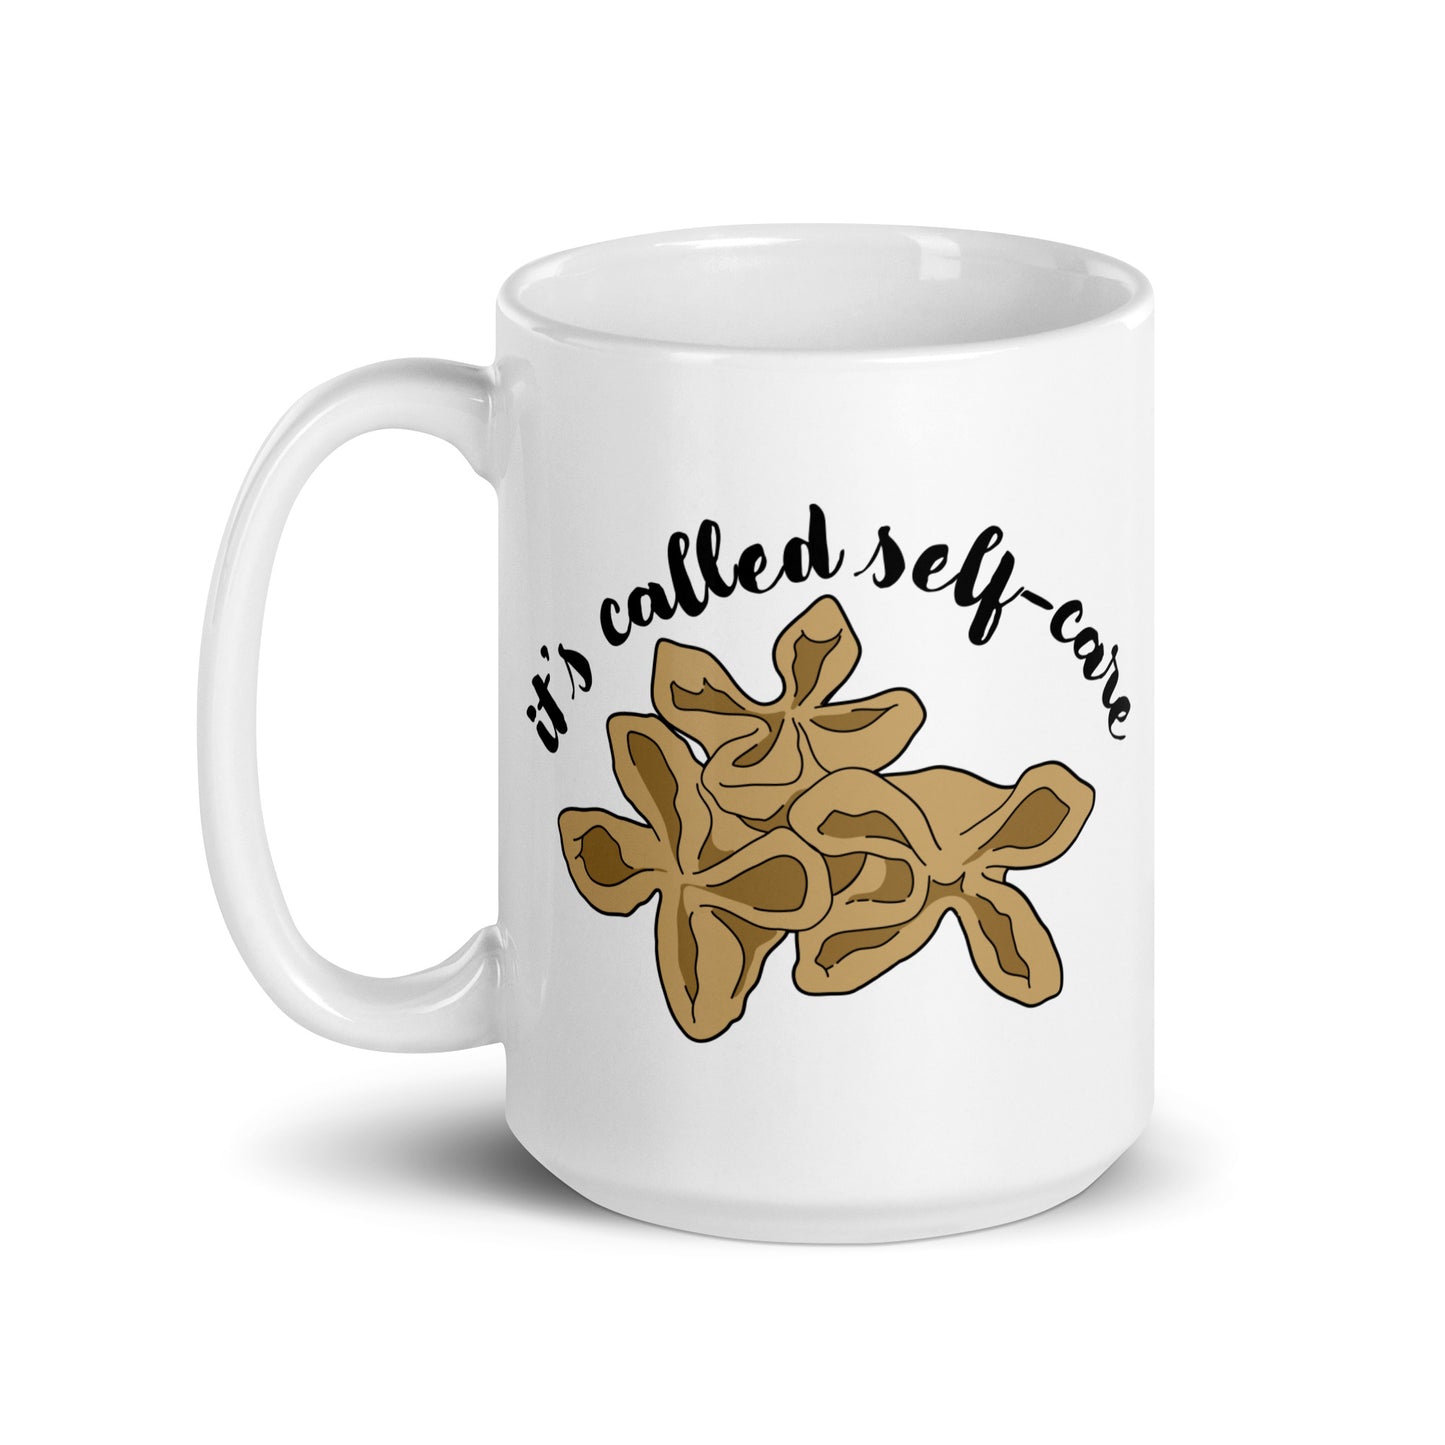 A white, 15 ounce ceramic mug featuring an illustration of three pieces of crab rangoon. Text in an arc above the crab rangoon reads "it's called self-care" in a cursive script.